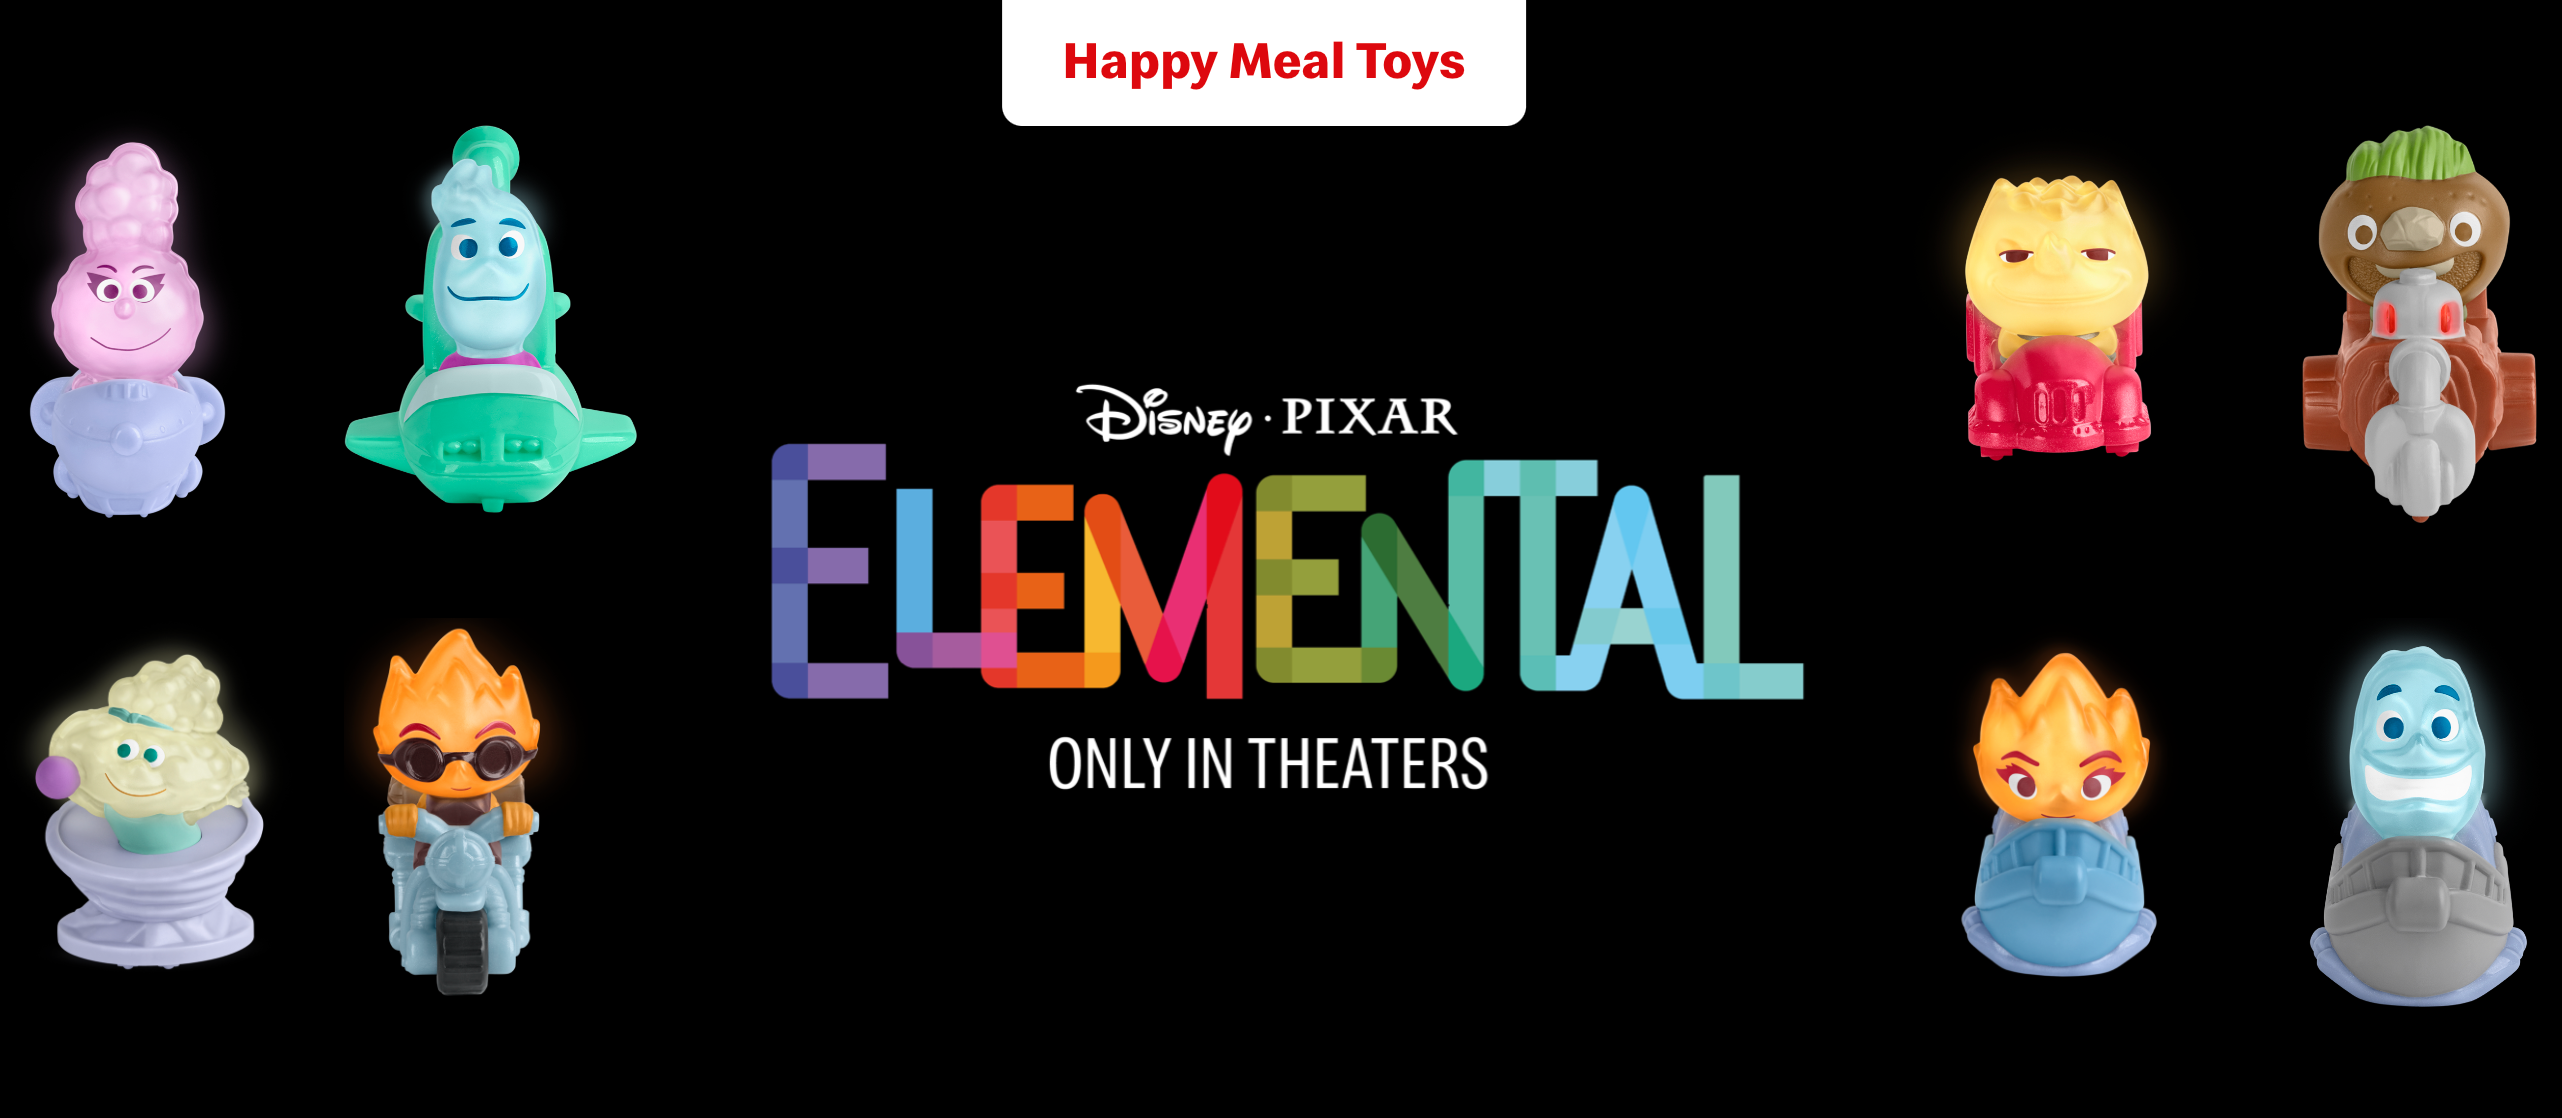 NEW Disney Happy Meal Toys Now Available at McDonald’s! Disney Food